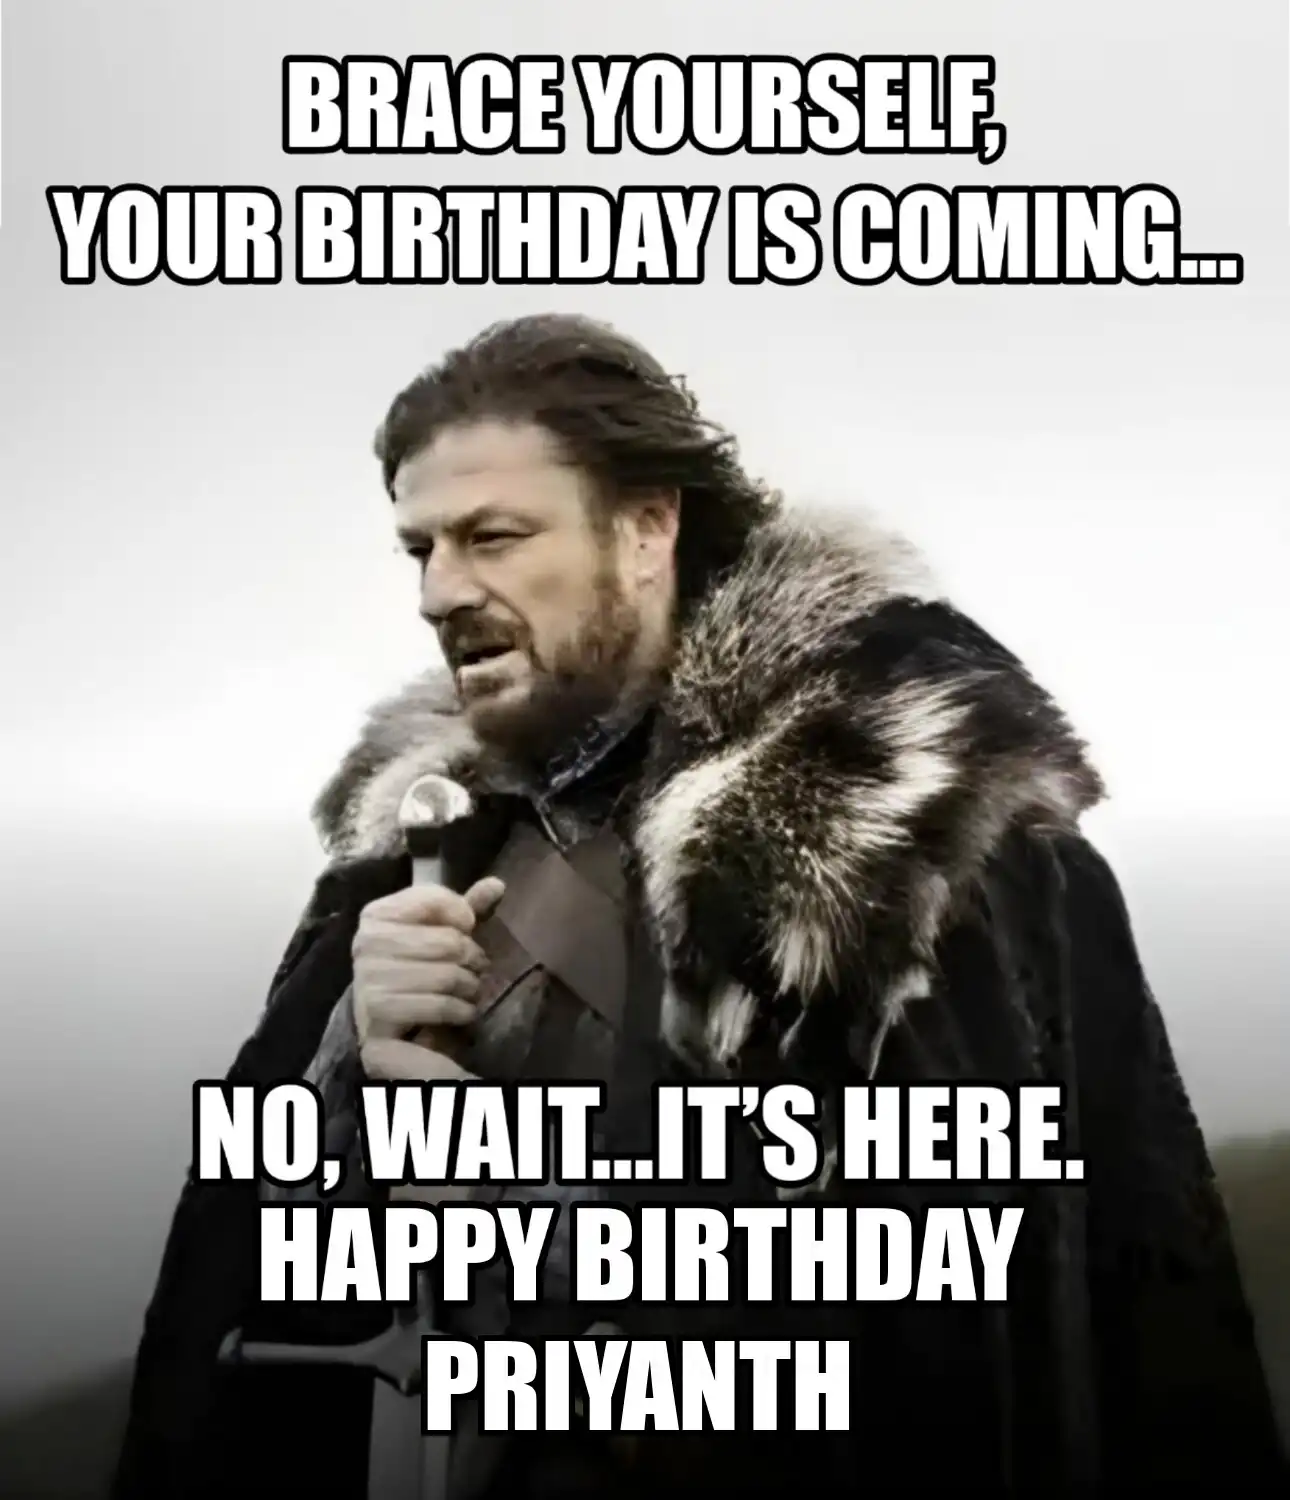 Happy Birthday Priyanth Brace Yourself Your Birthday Is Coming Meme